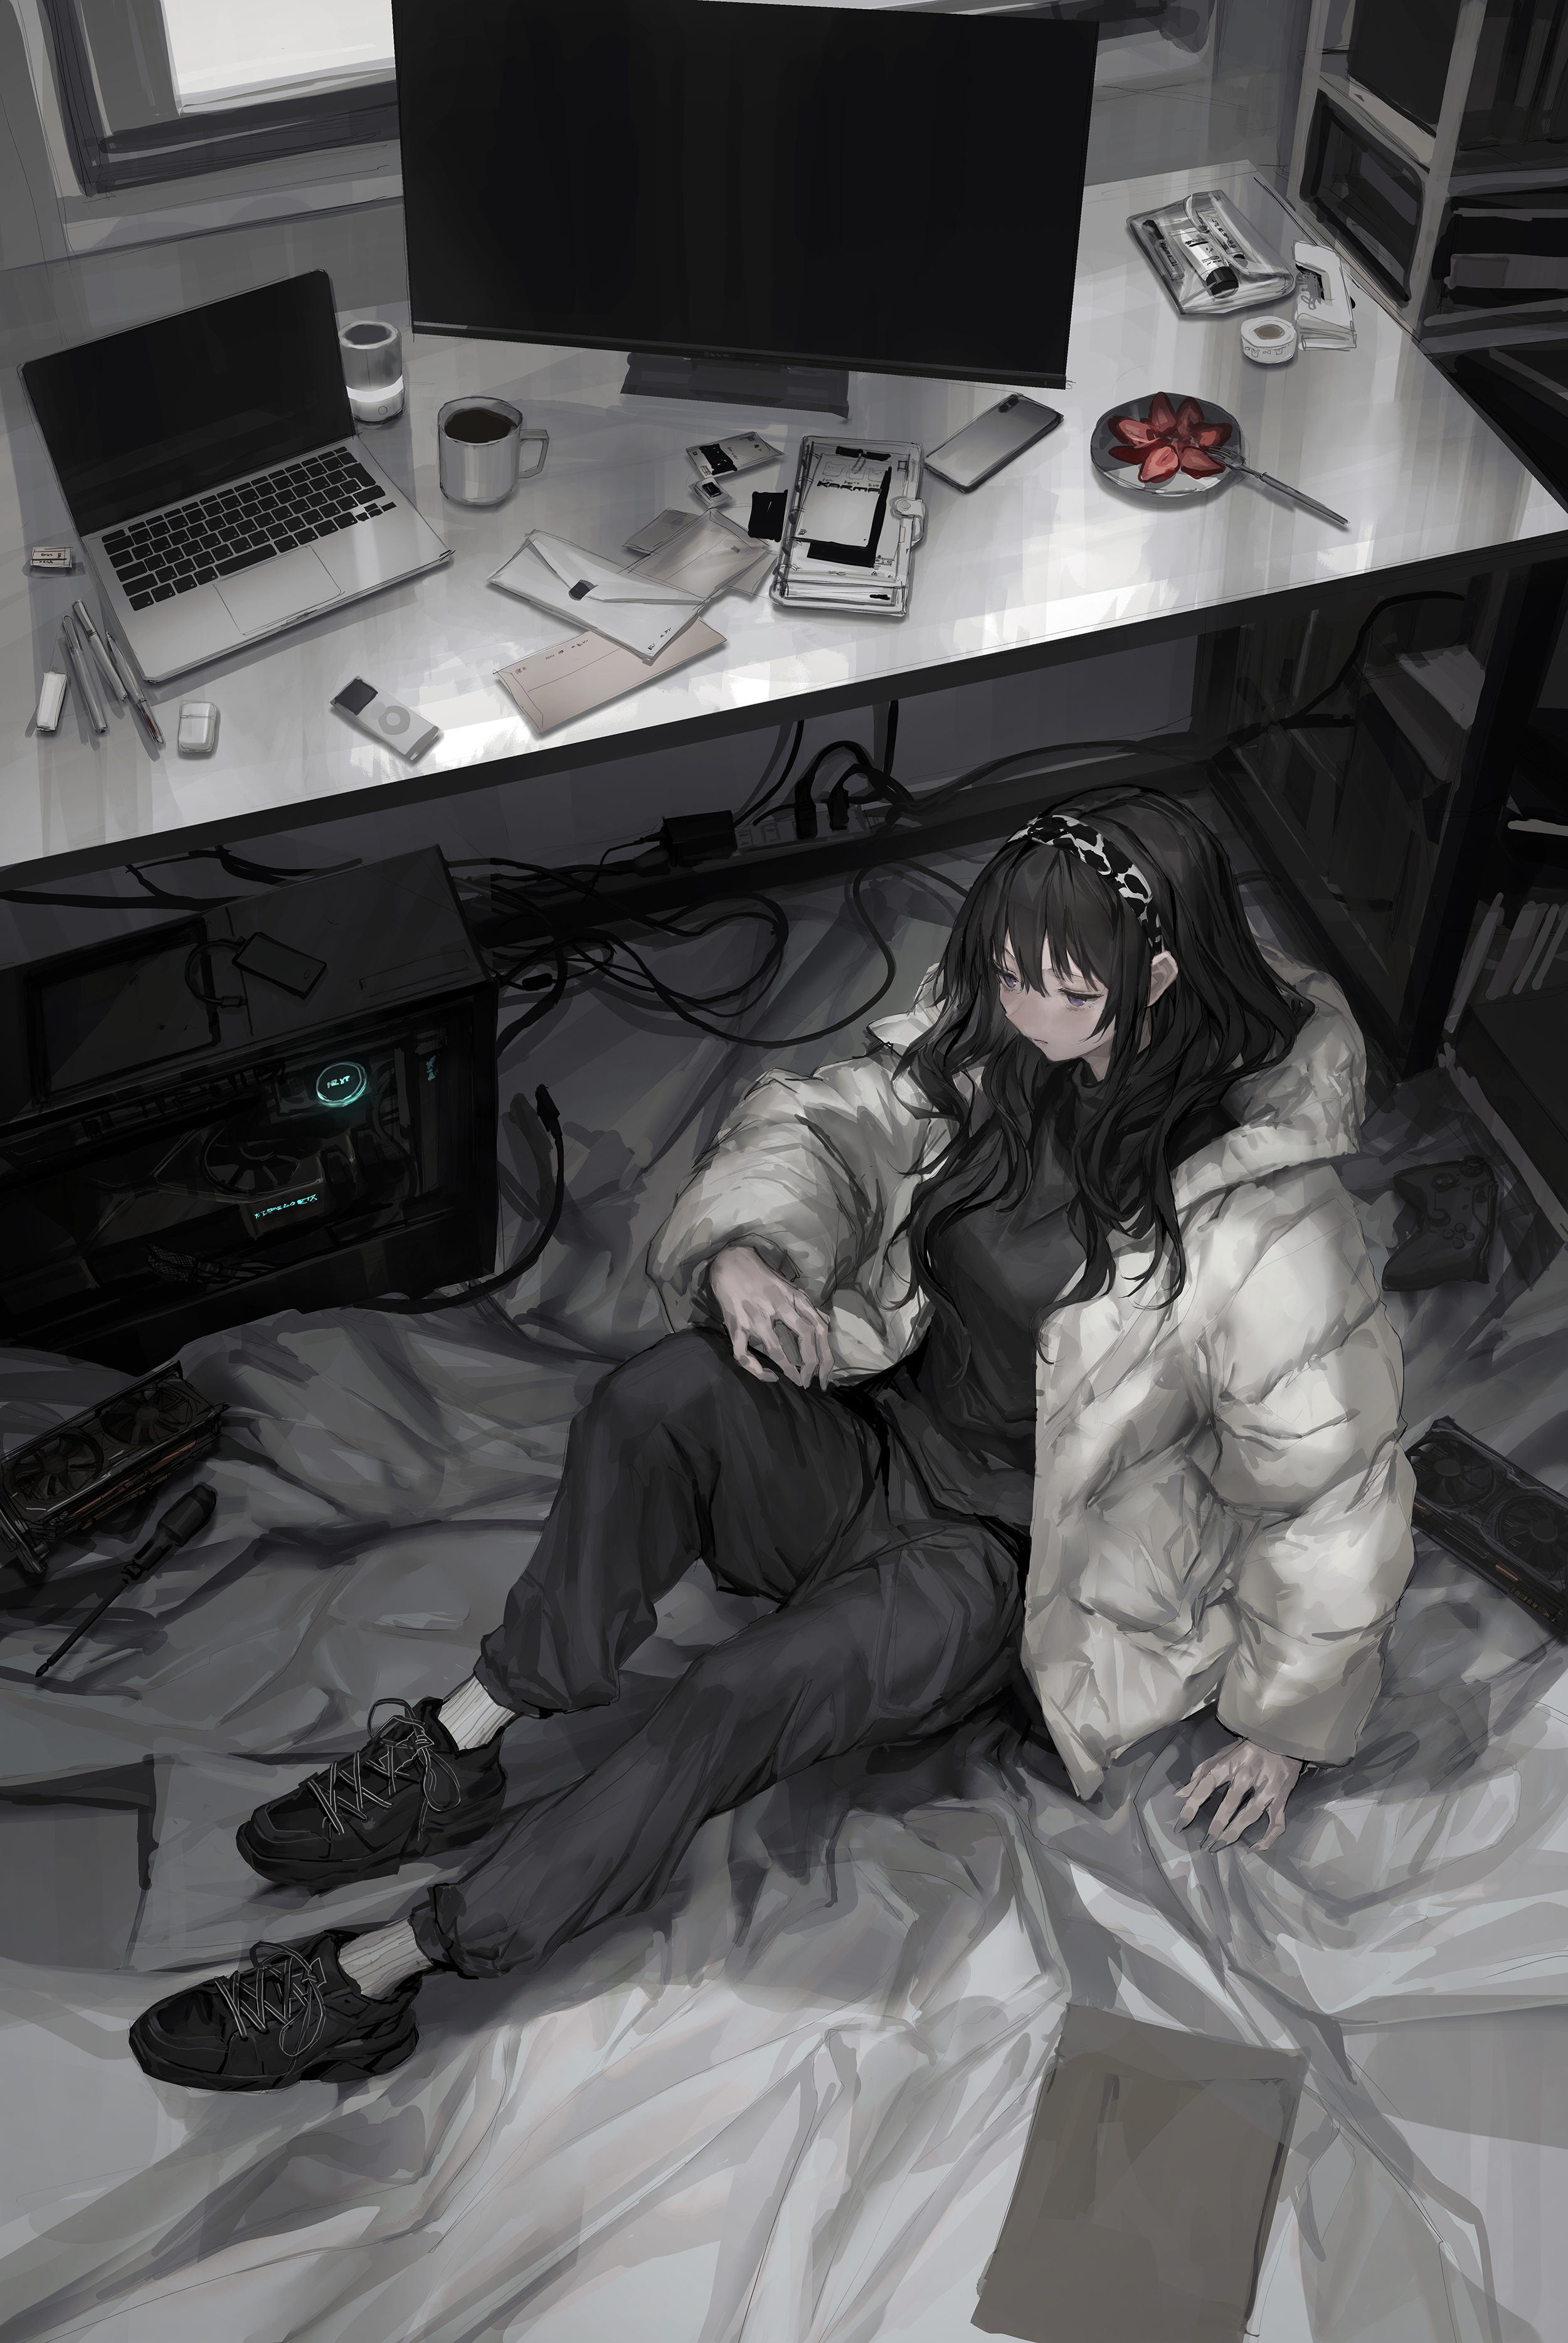 Anime Anime Girls Original Characters LM7 Vertical Black Hair Op Center THE LM7 Computer Laptop 2500x3736